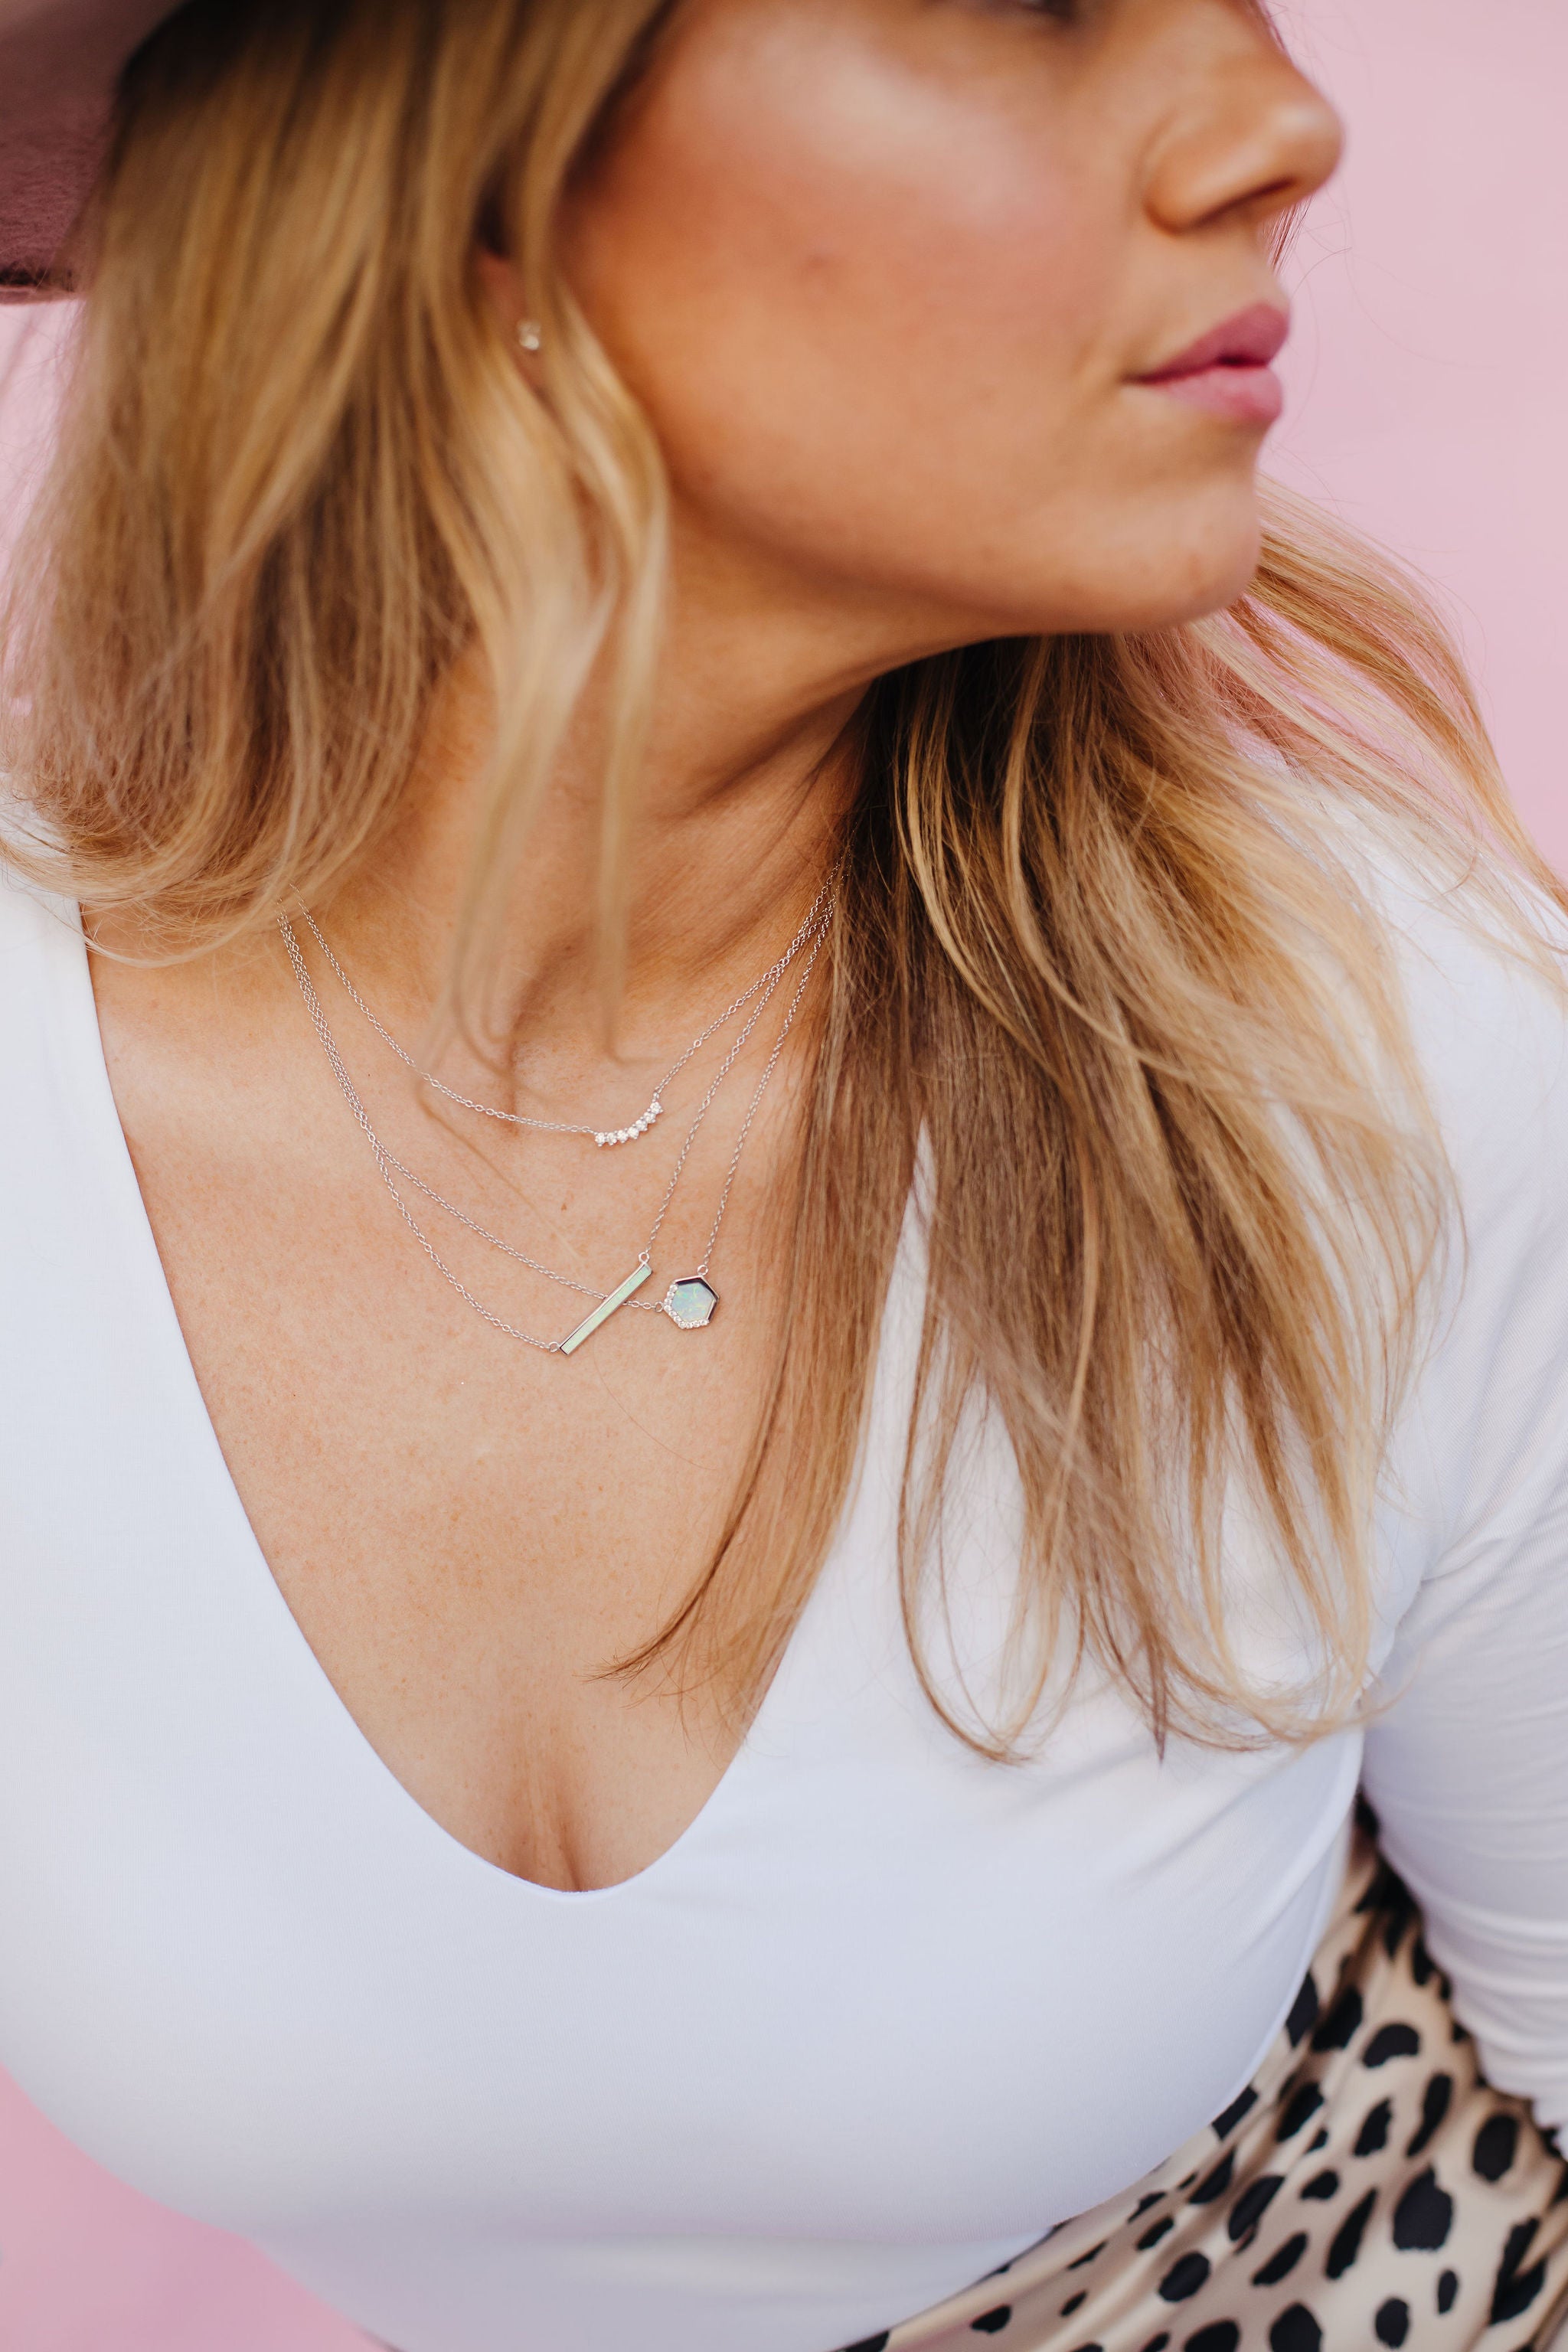 Chloe + Lois Dainty Layering Necklaces